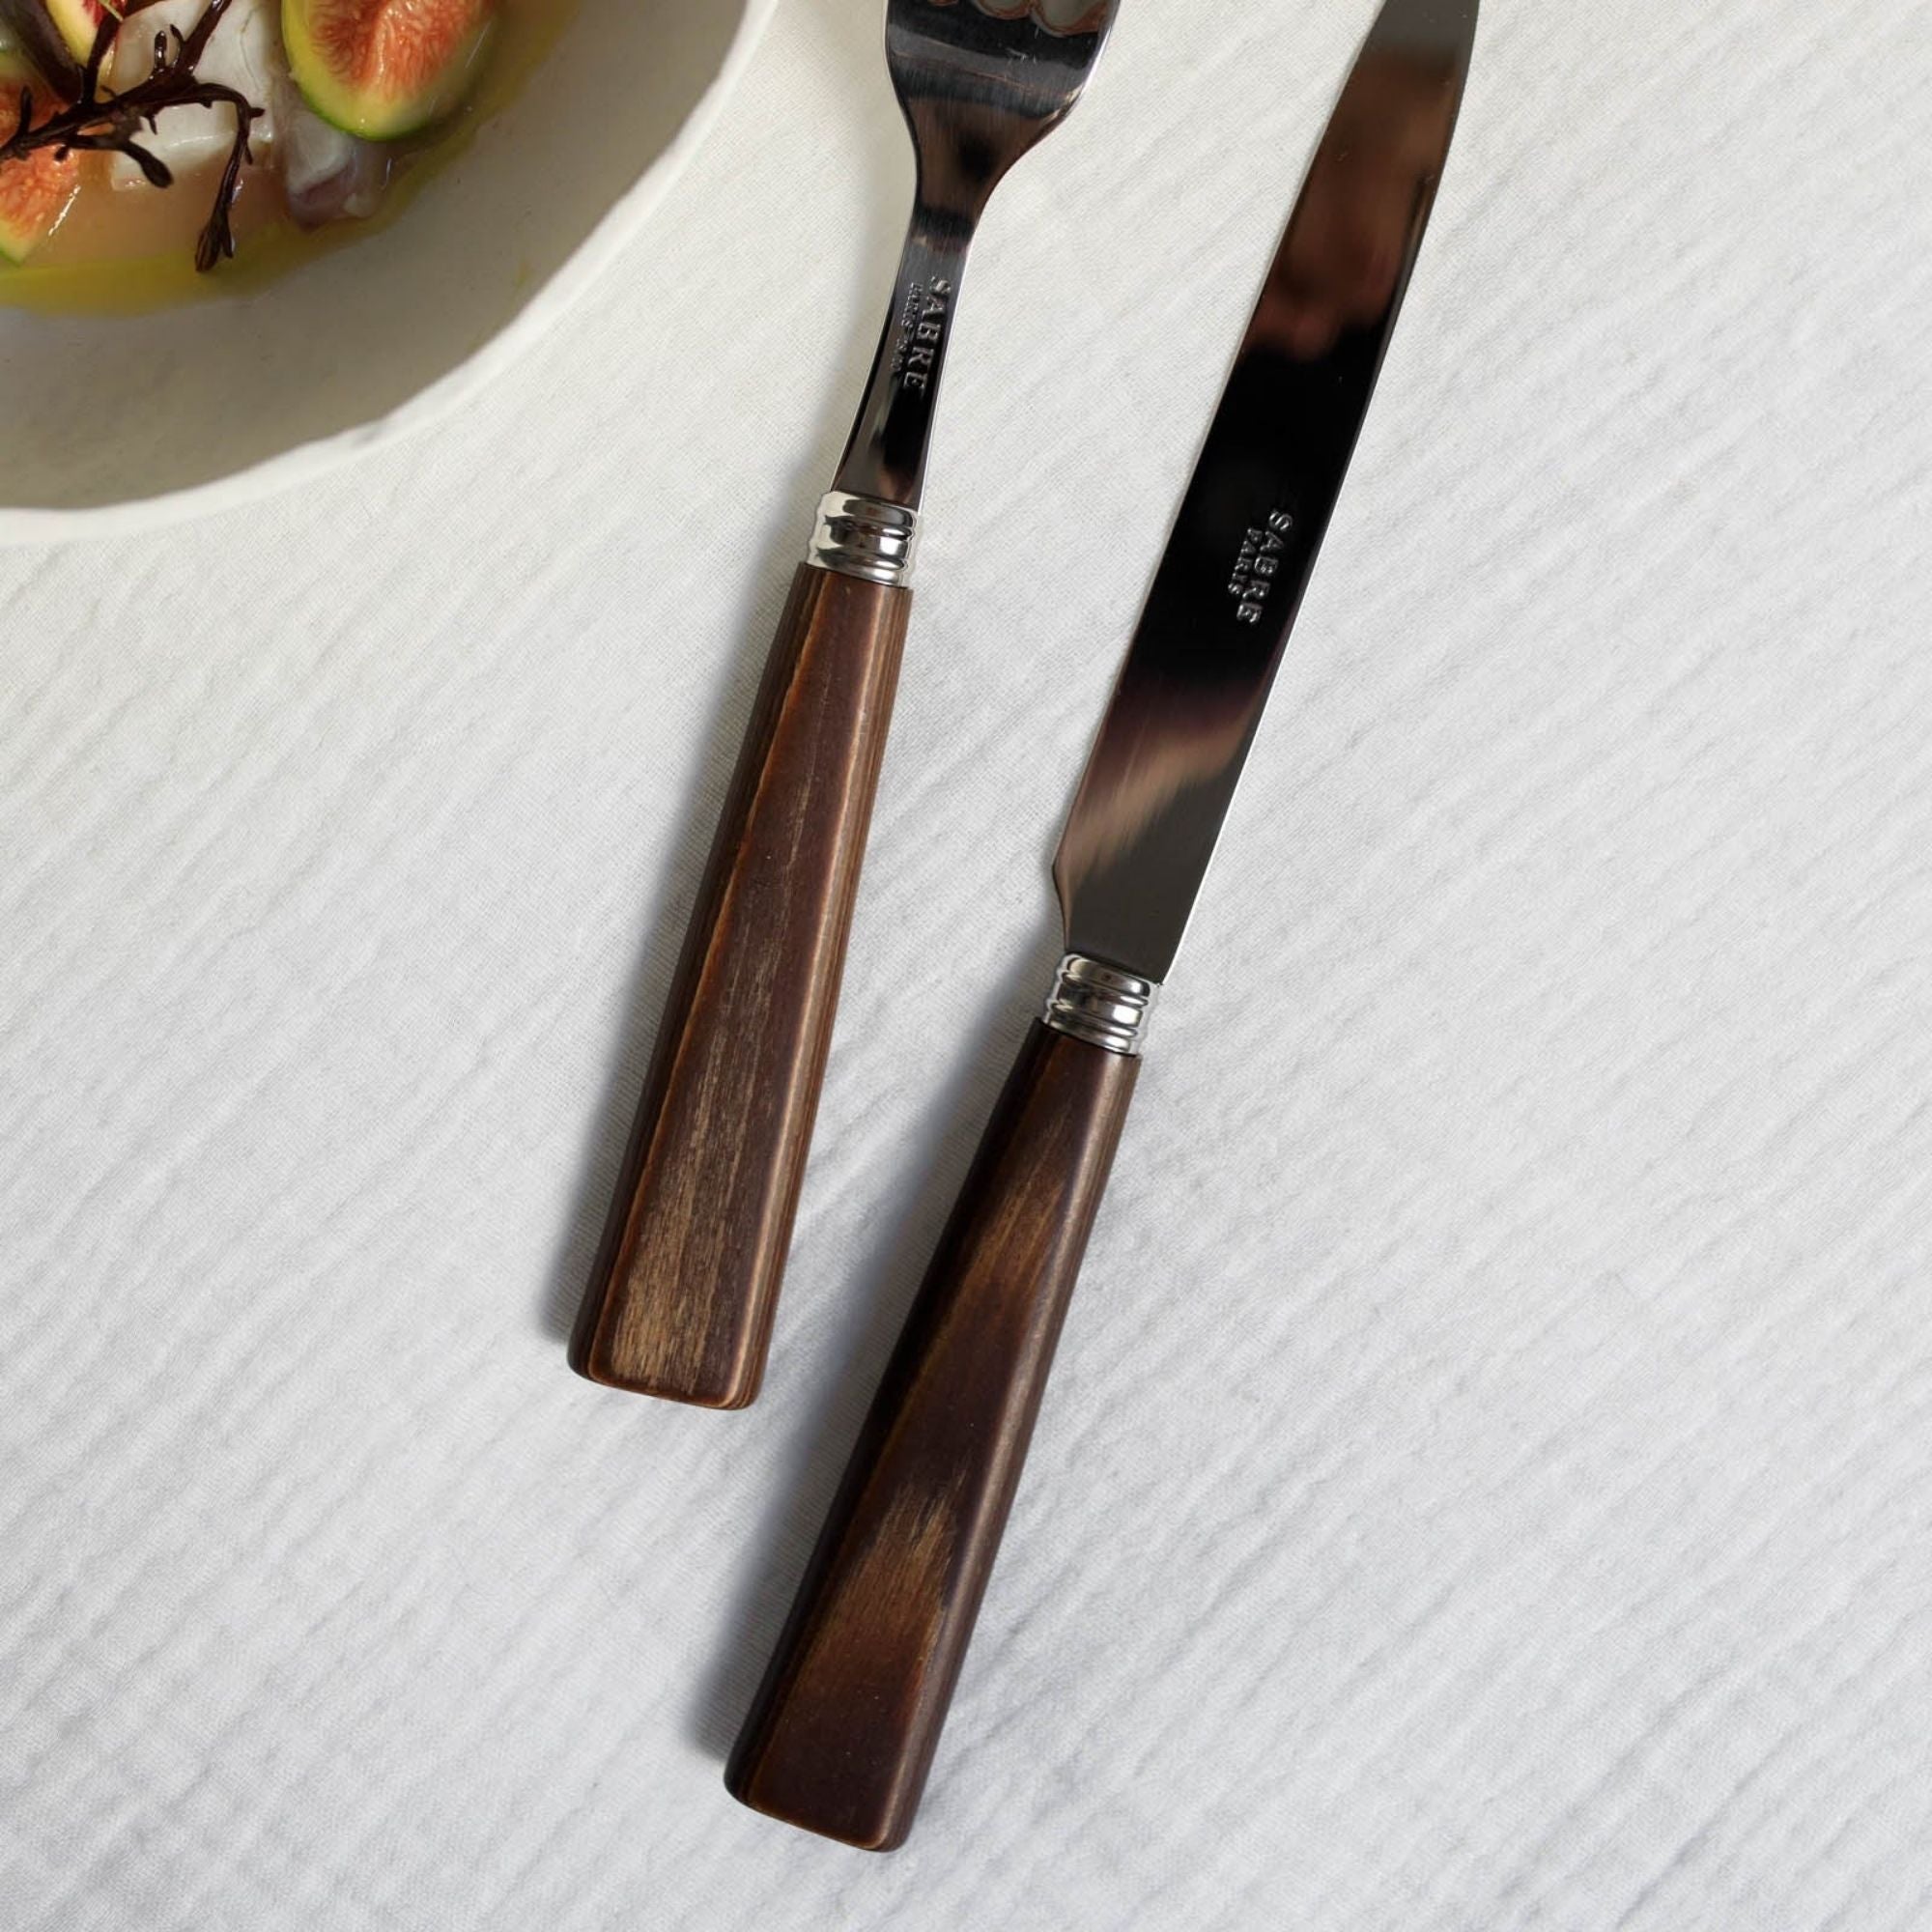 Nature Cutlery Set - THAT COOL LIVING